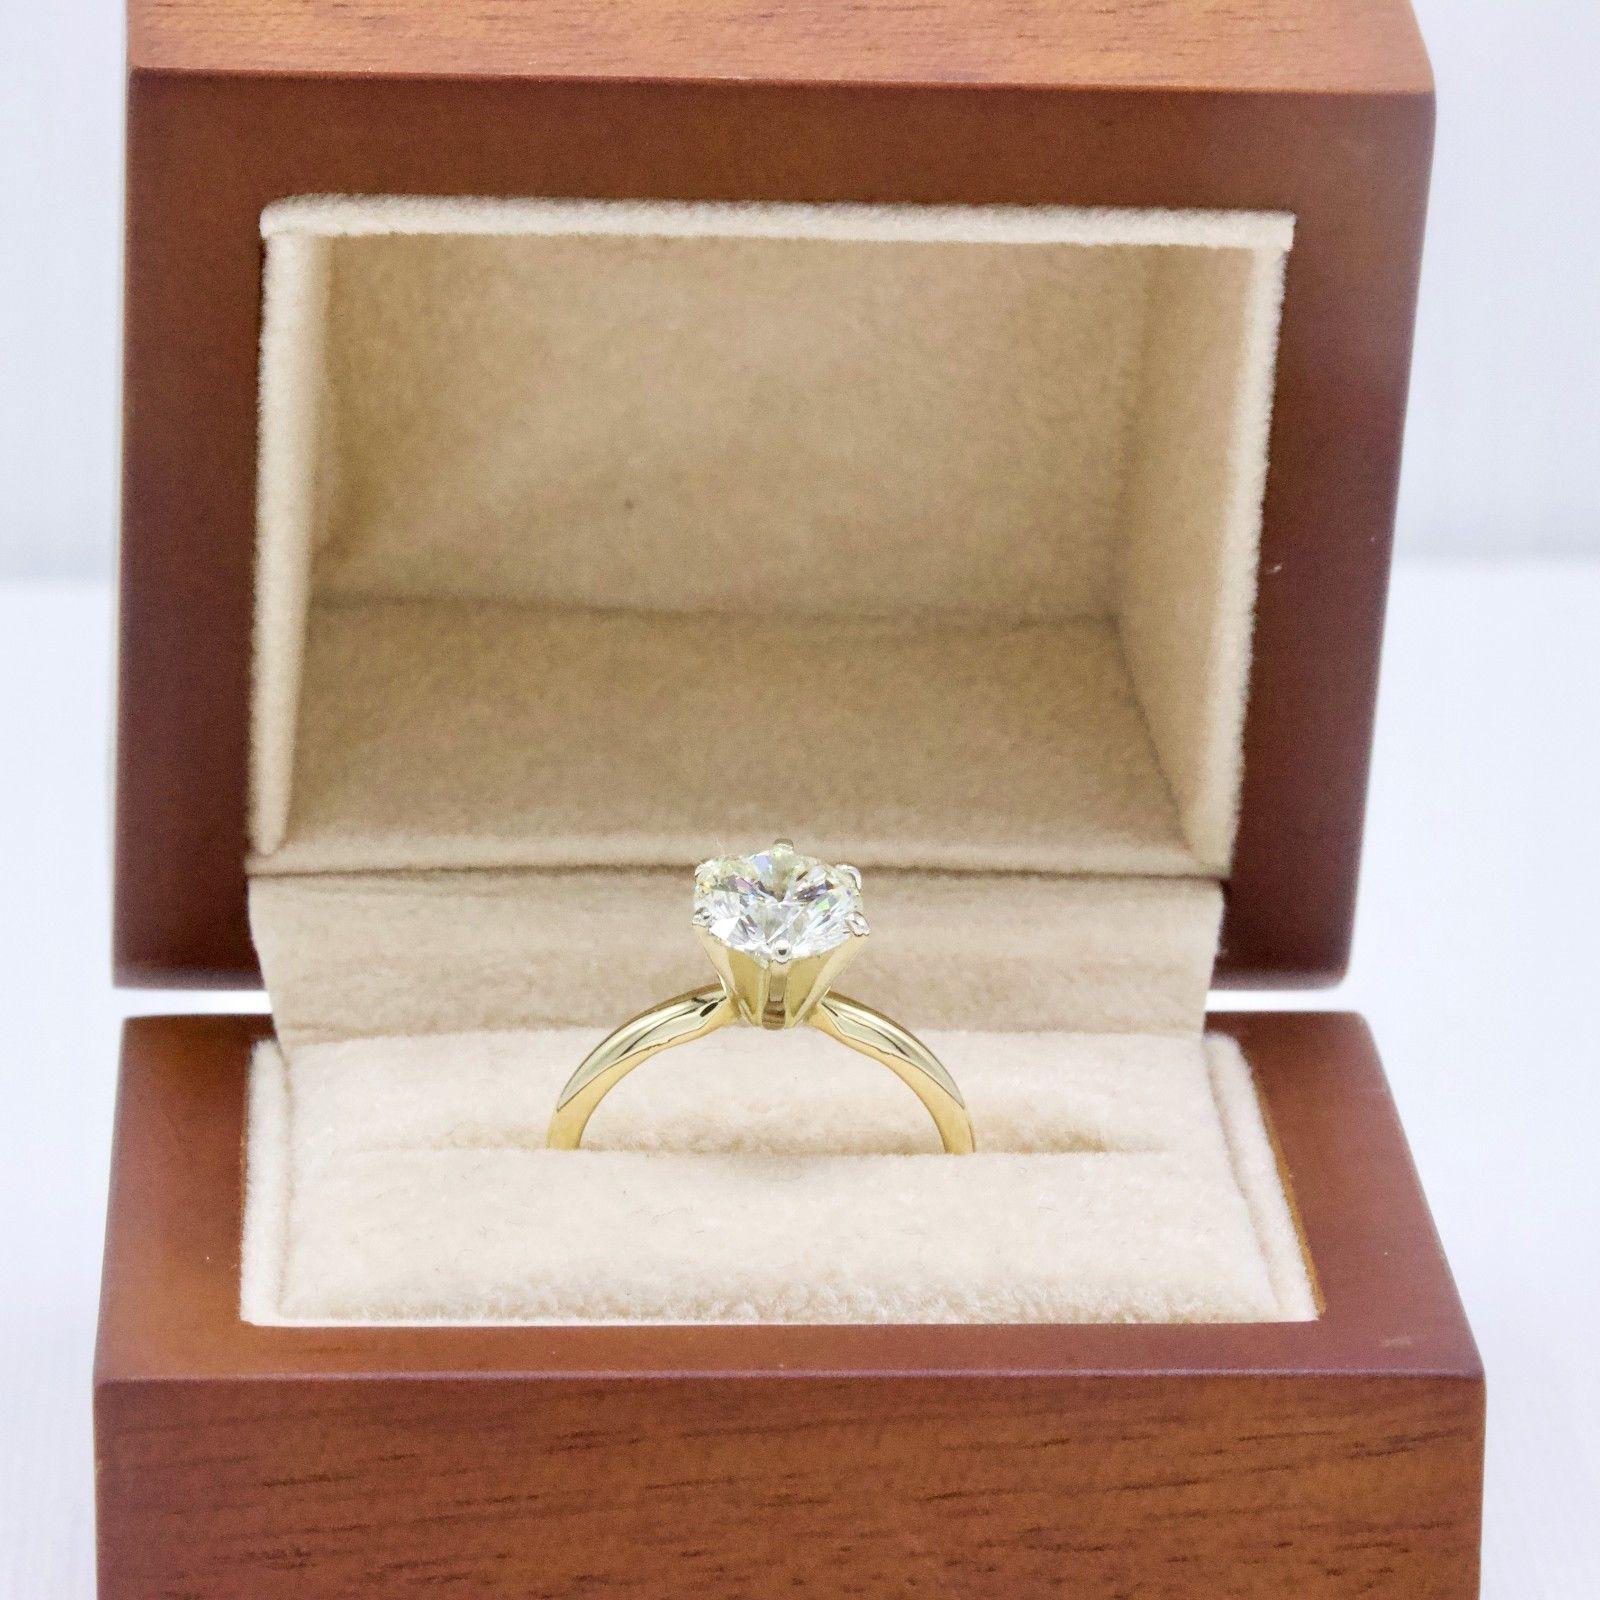 The Leo Diamond by Leo Schachter

Style:  Solitaire Engagement Ring
Serial Number:  LEO-207797
Certificate:  IGI #3229506U
Metal:  14K Yellow Gold
Size:   5.5 - sizable
Total Carat Weight:  1.57 CTS
Diamond Shape:  Leo Round 
Diamond Color &